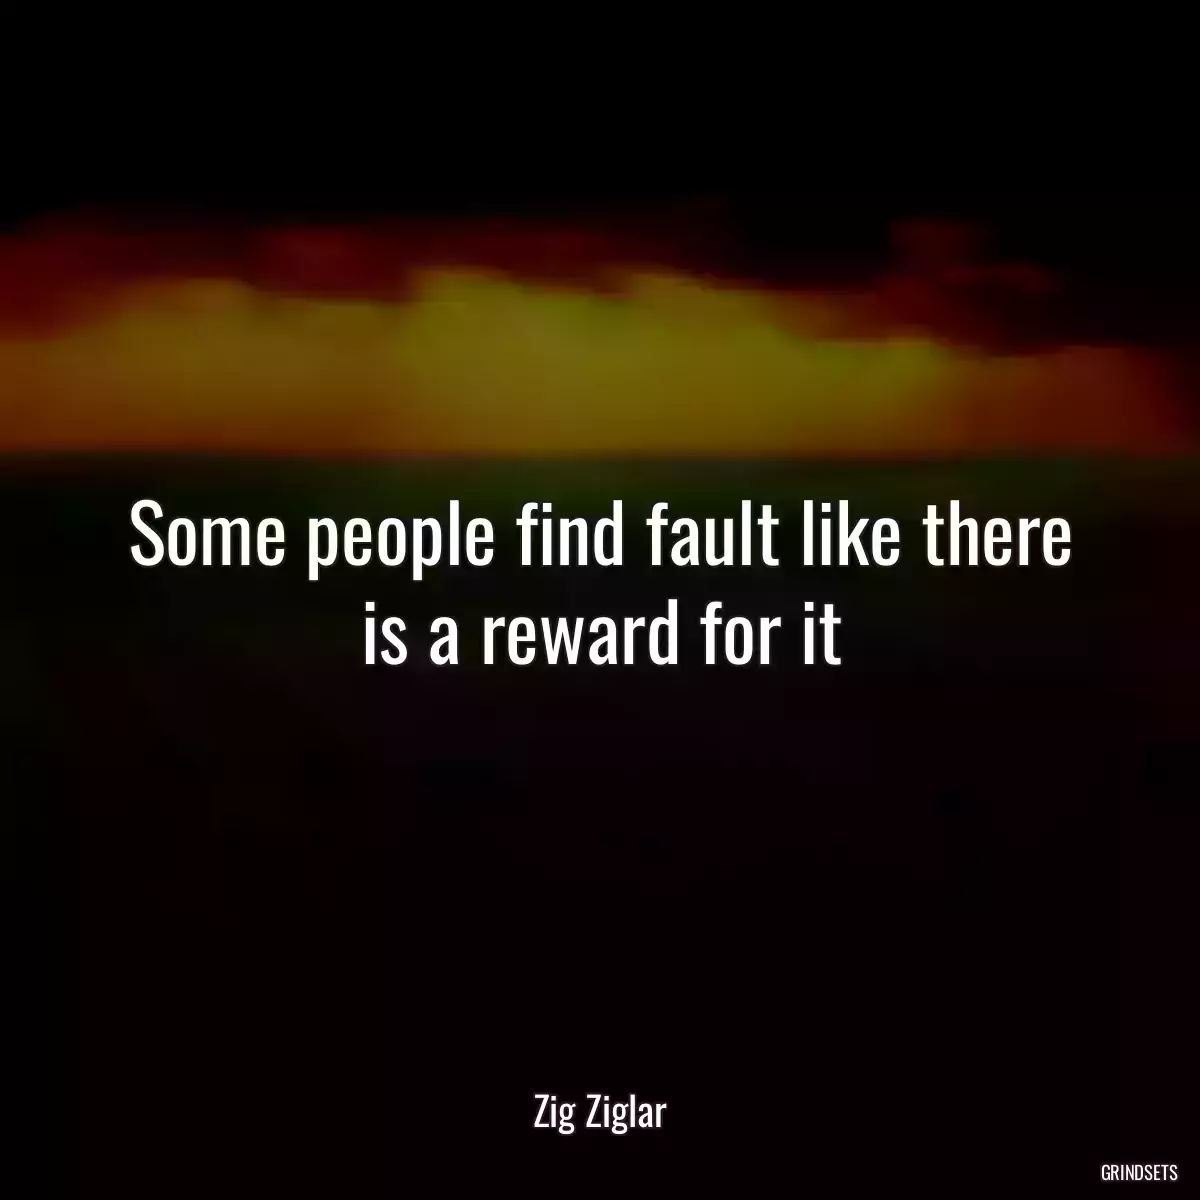 Some people find fault like there is a reward for it